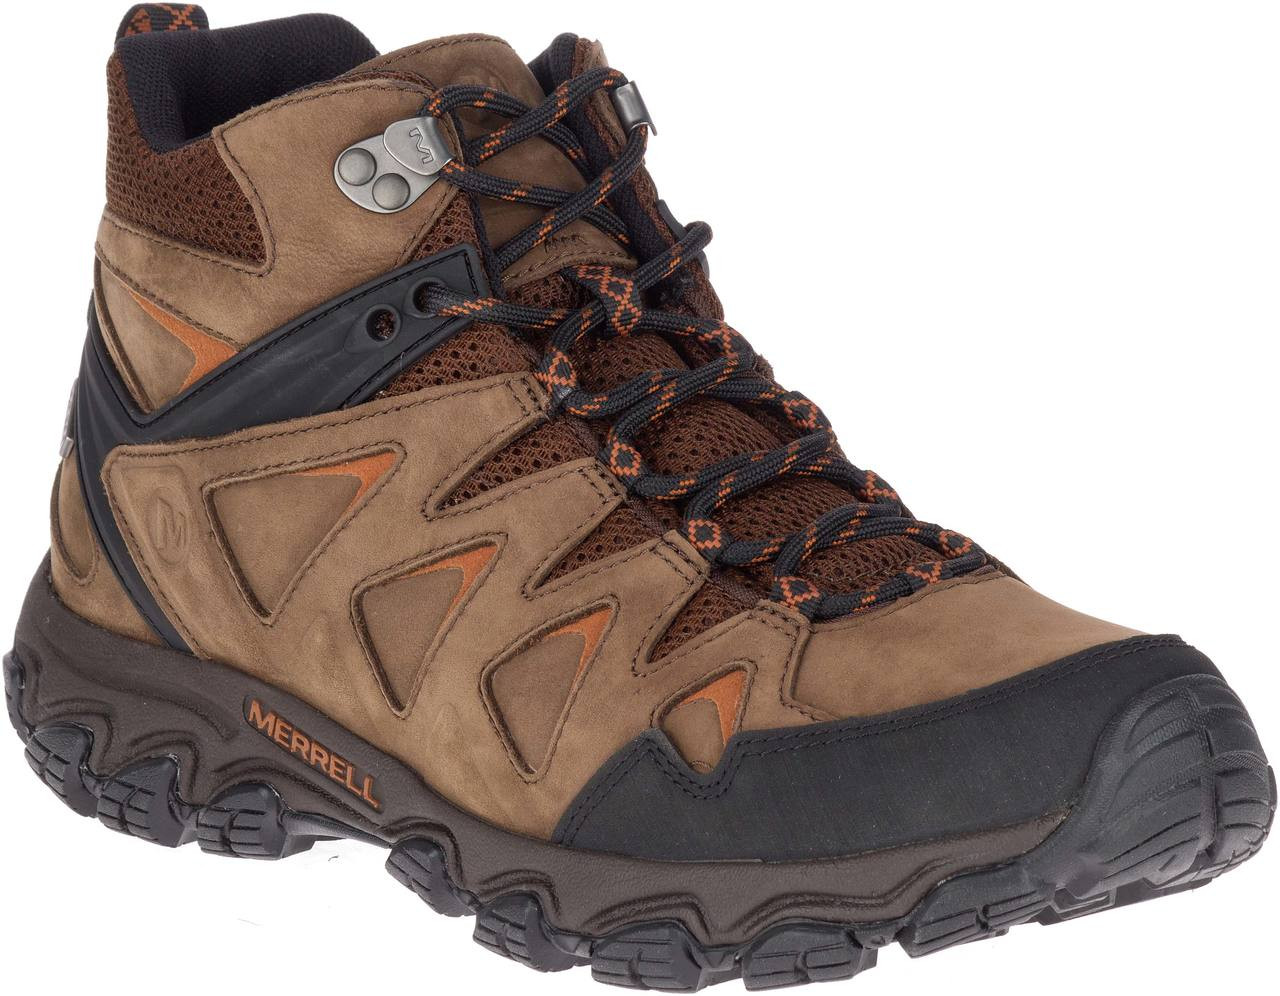 Merrell Men's Pulsate 2 Mid Leather Waterproof - FREE Shipping & FREE ...